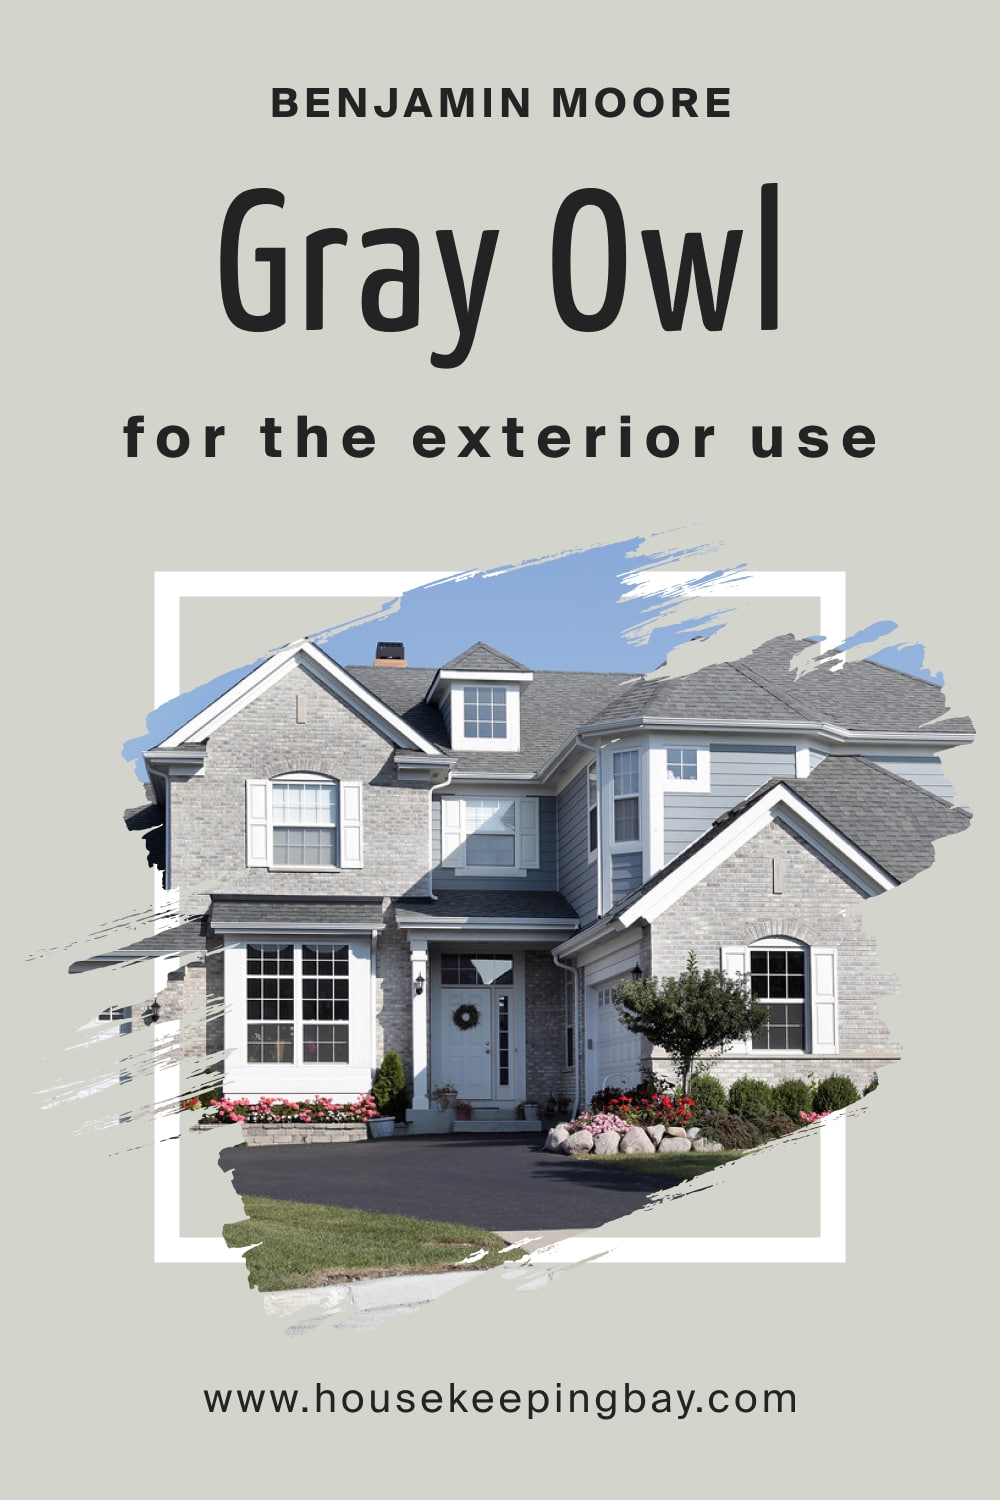 Benjamin Moore. Gray Owl 2137 60 for the Exterior Use